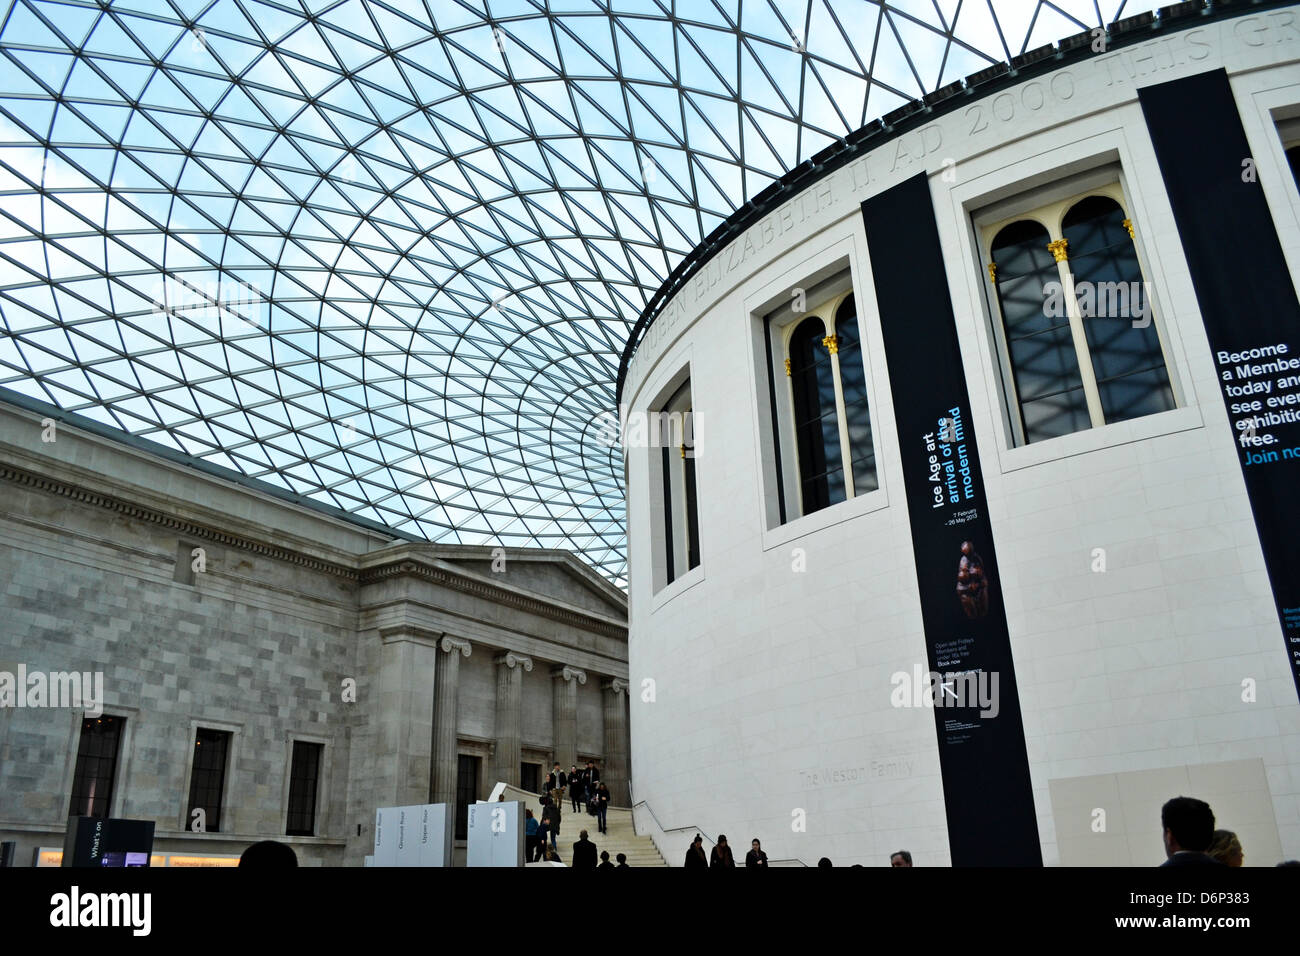 British Museum Great Court, the largest covered public square in Europe. A Horizontal image of central drum, glass roof and internal classical facade. Stock Photo